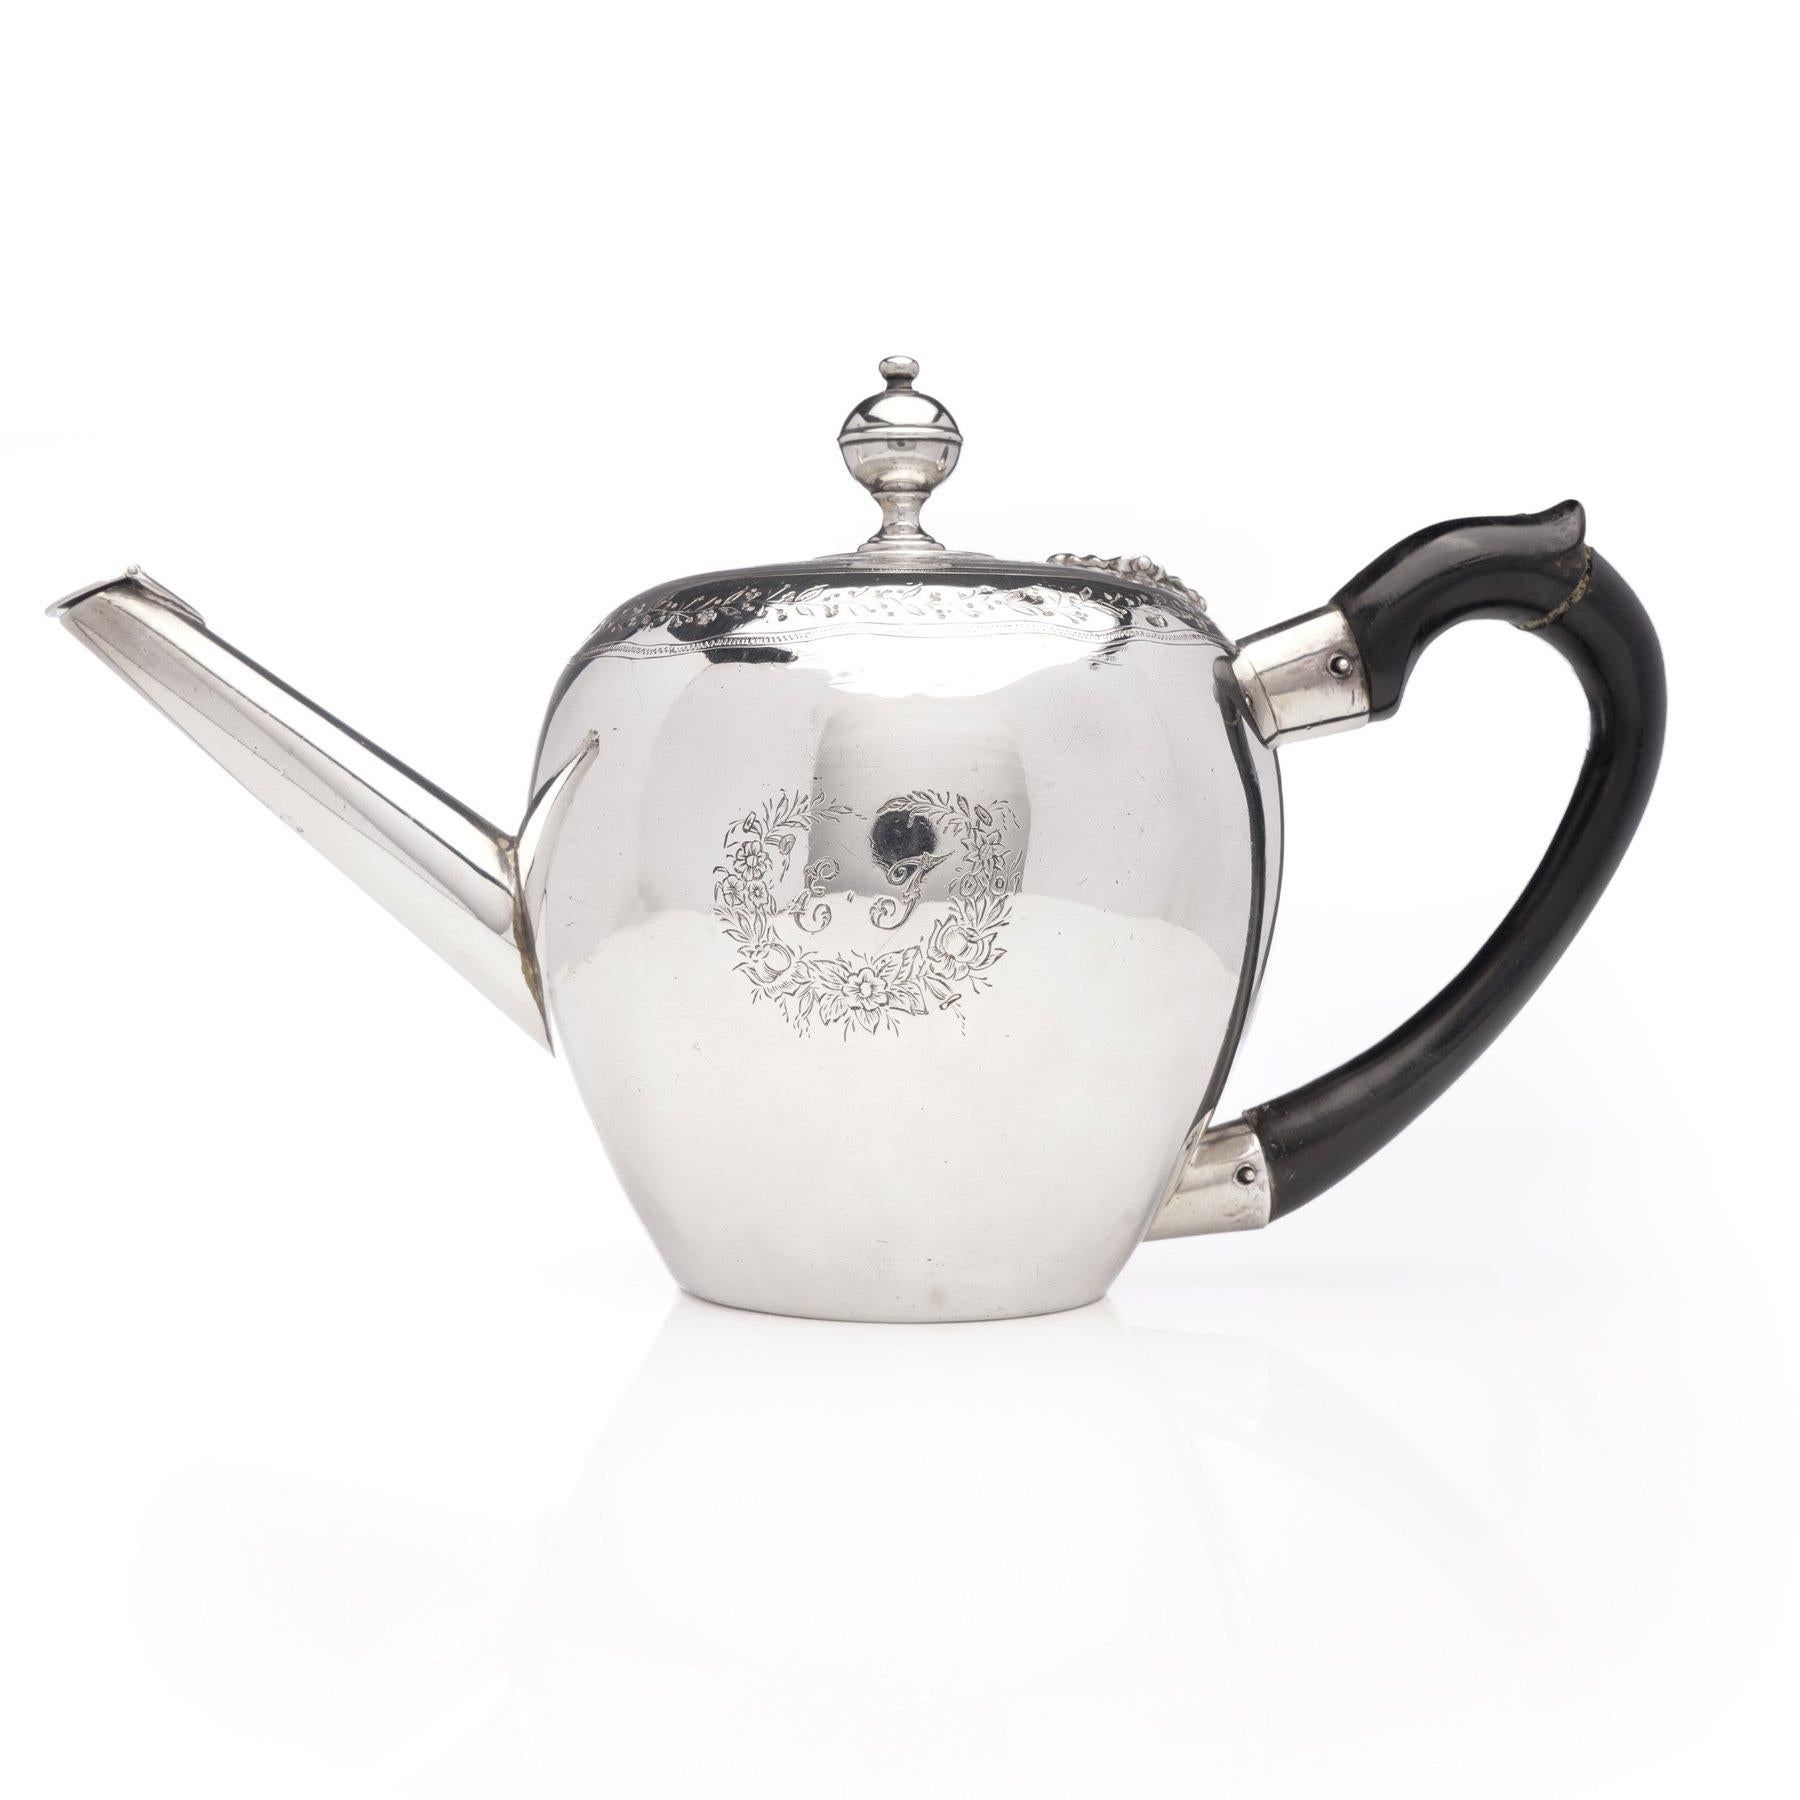 An Antique Georgian sterling silver bachelor bullet teapot with engraved initial letters '  E & J ' .

Made in England, London, 1799
Maker: William Bottle & Jeremiah Wilsher
Fully hallmarked.

Dimensions - 
Length : 21.5 cm
Width 9.5 cm 
Height 13